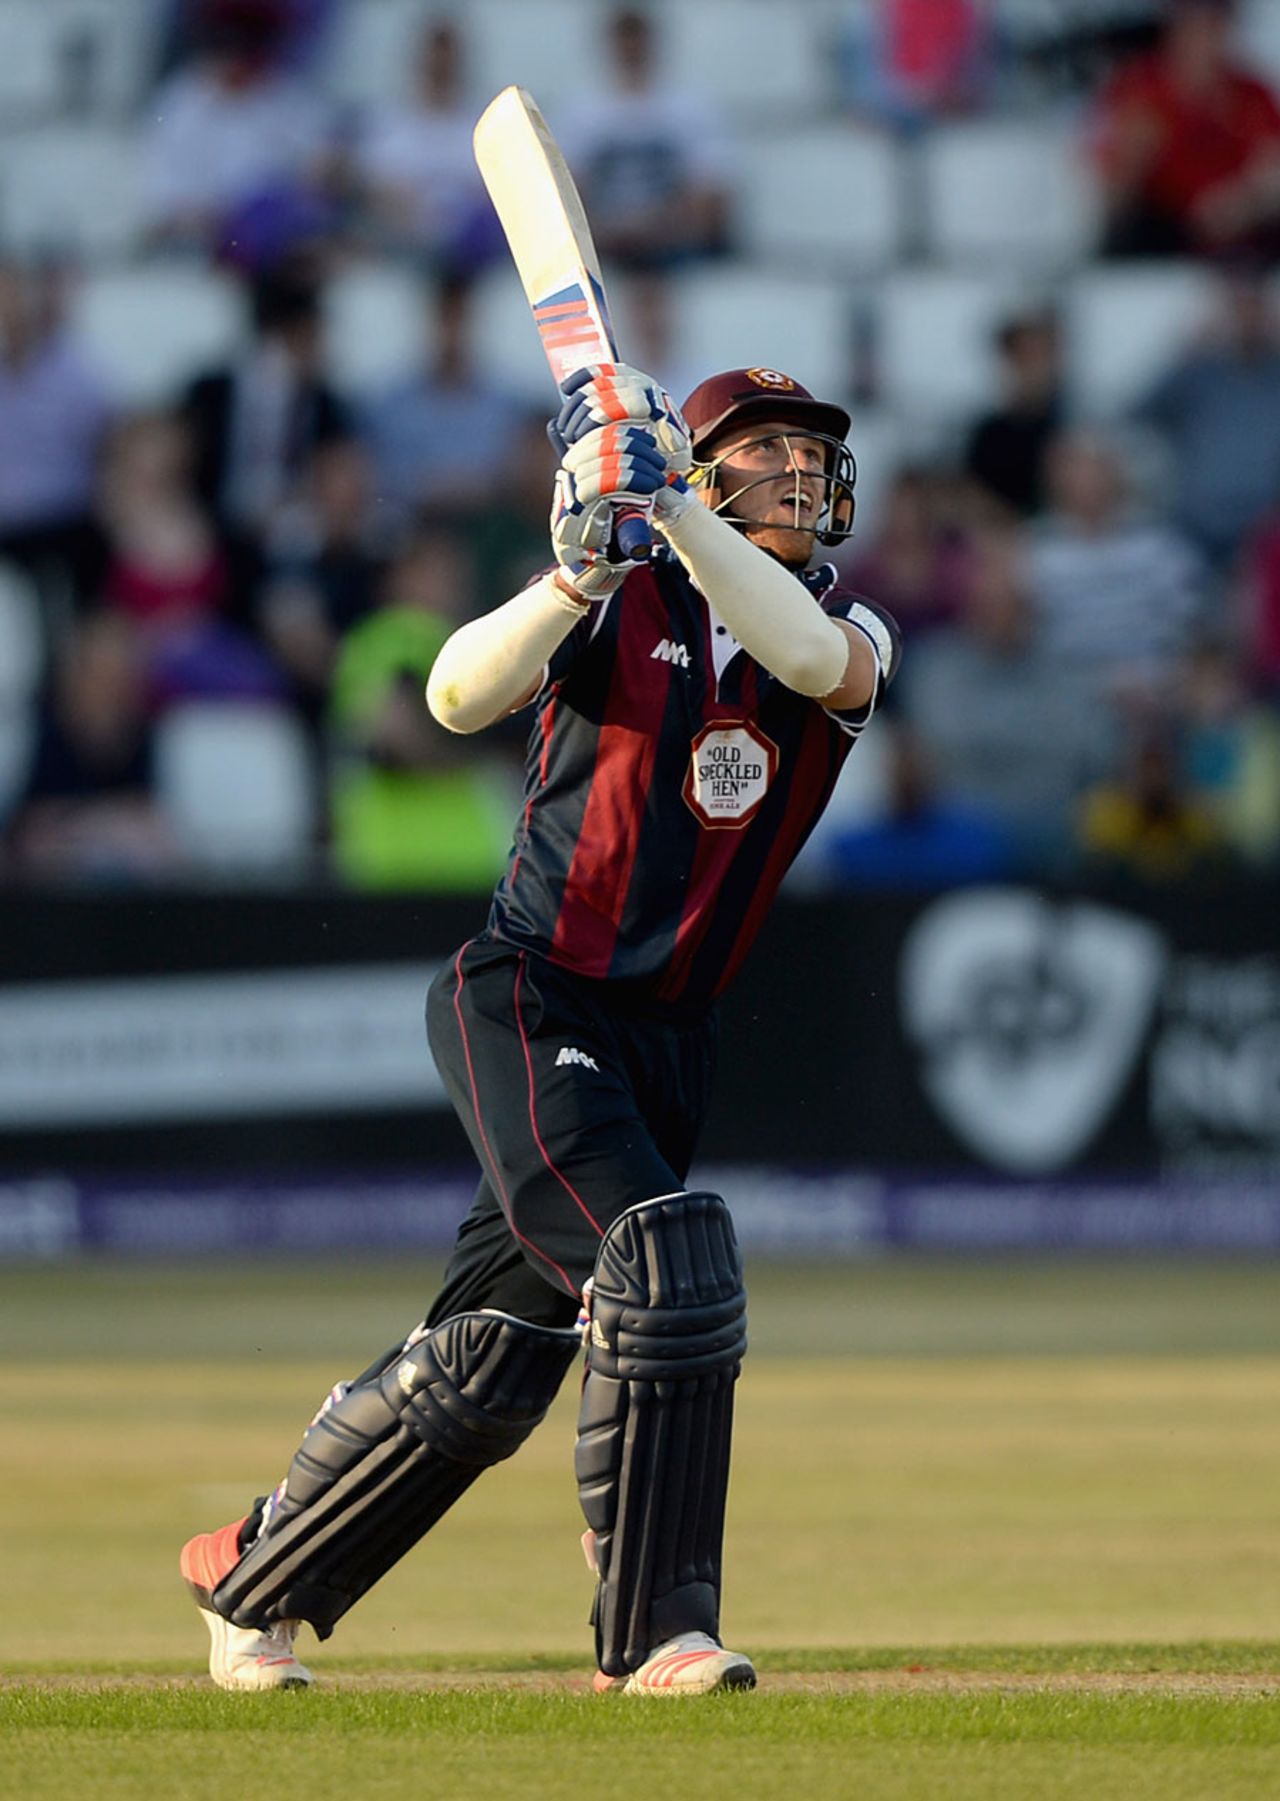 David Willey clubbed 60 off 27 balls, Northamptonshire v Derbyshire, NatWest T20 Blast, North Group, Wantage Road, June 11, 2015